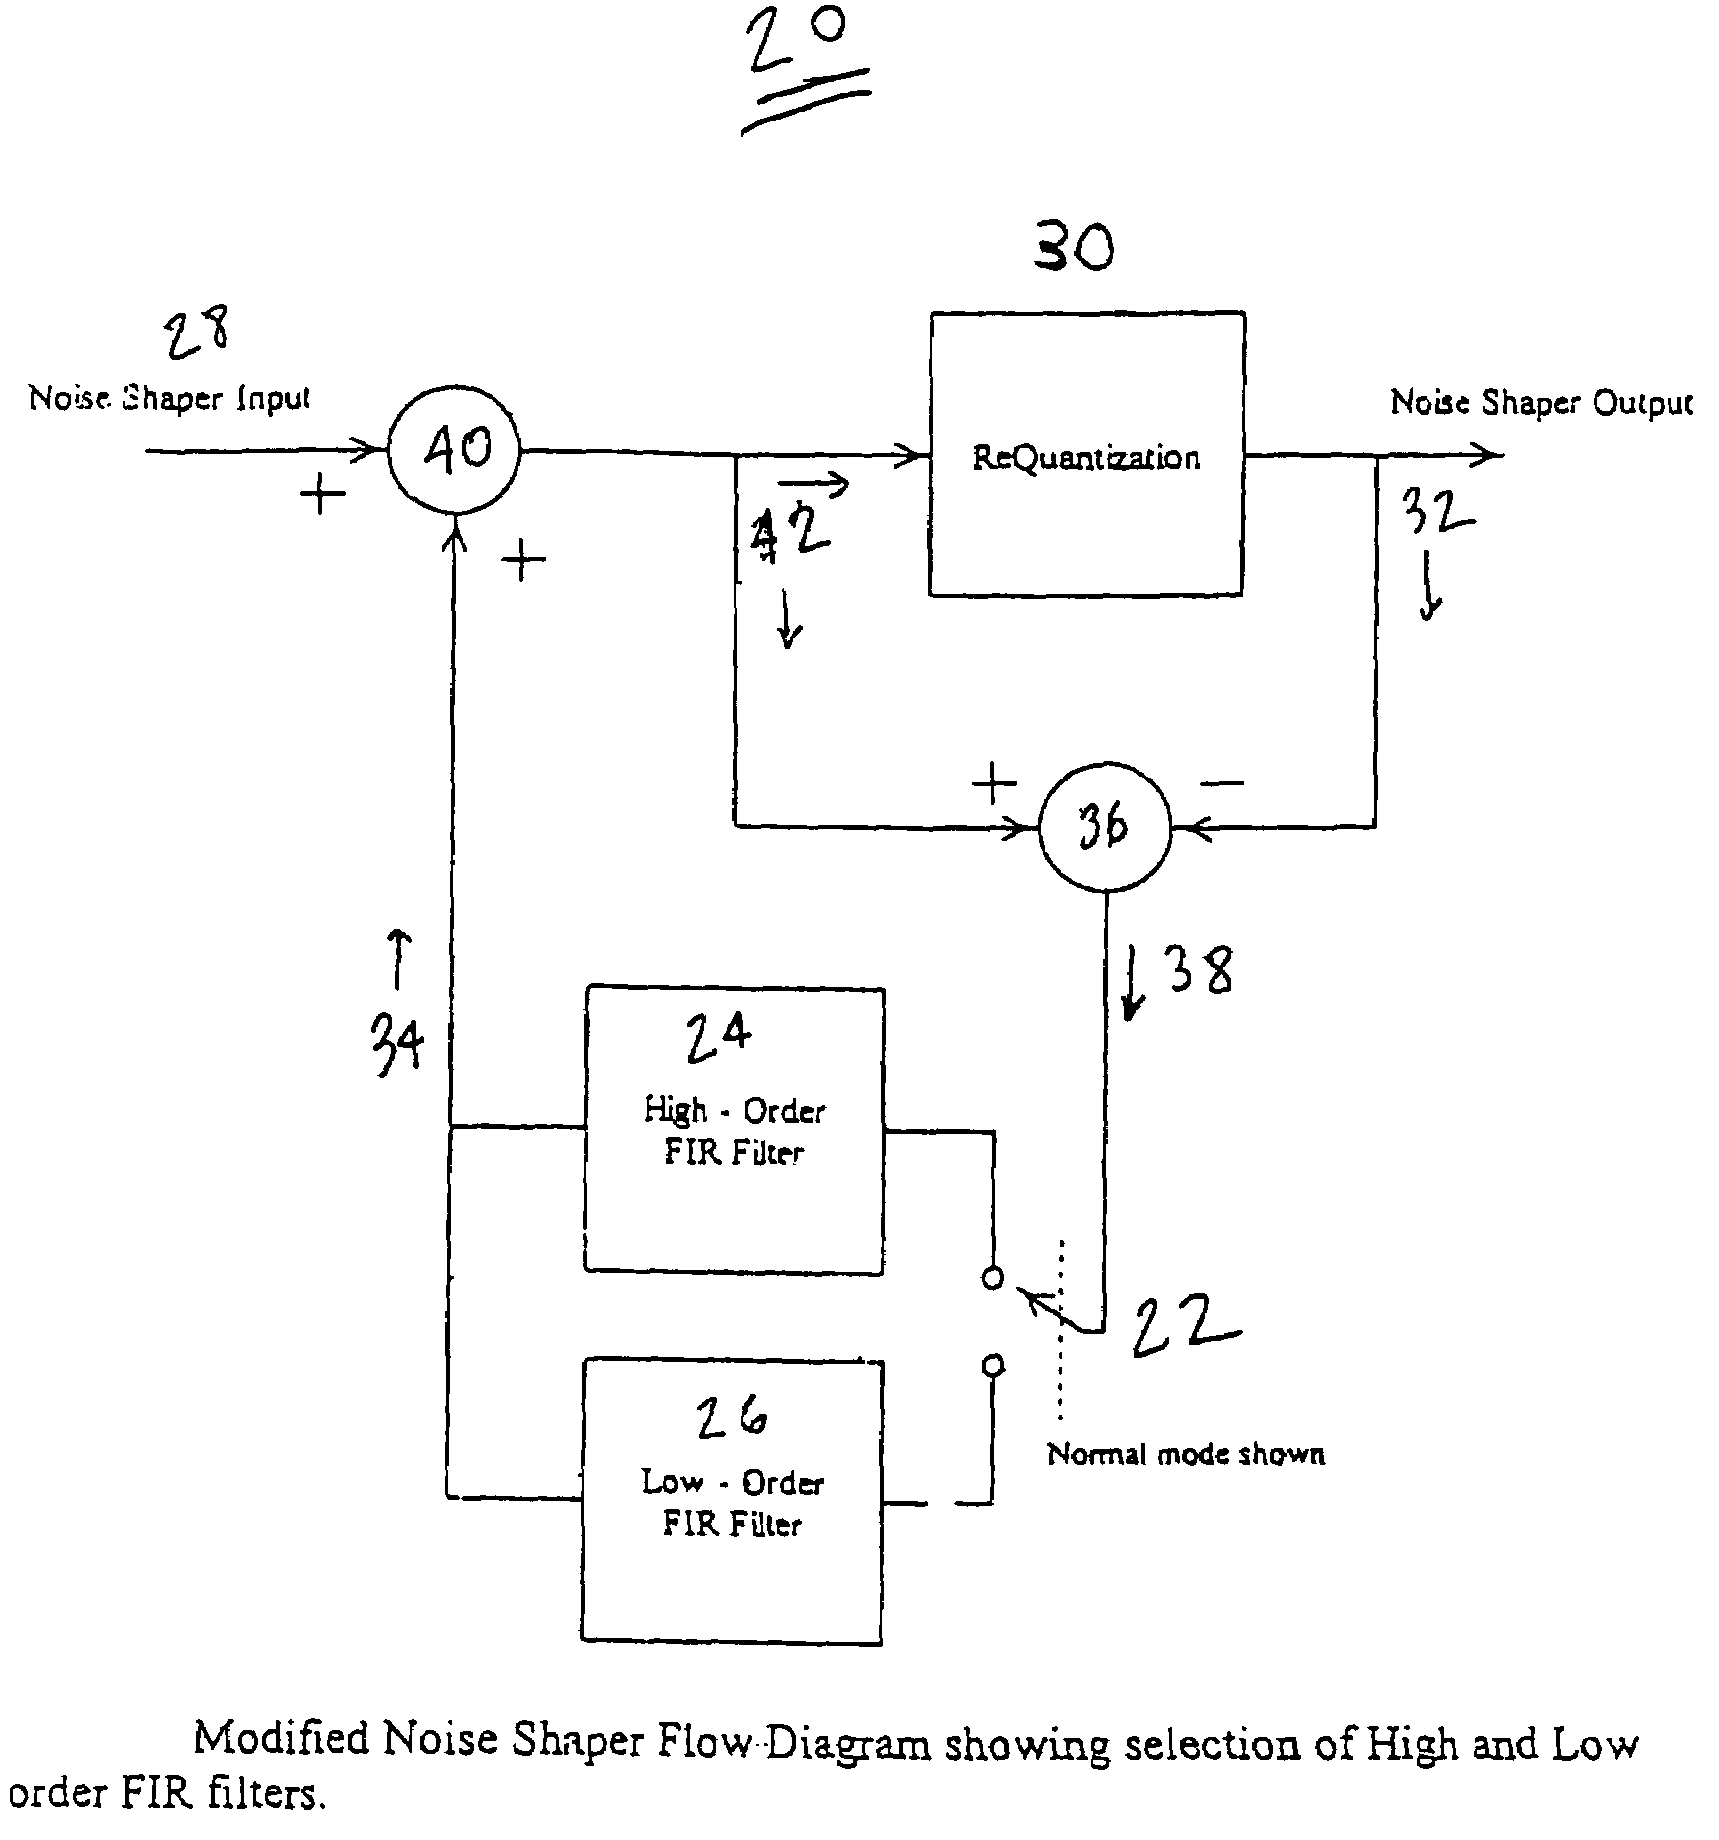 Reduction of radio frequency interference (RFI) produced by switching amplifiers